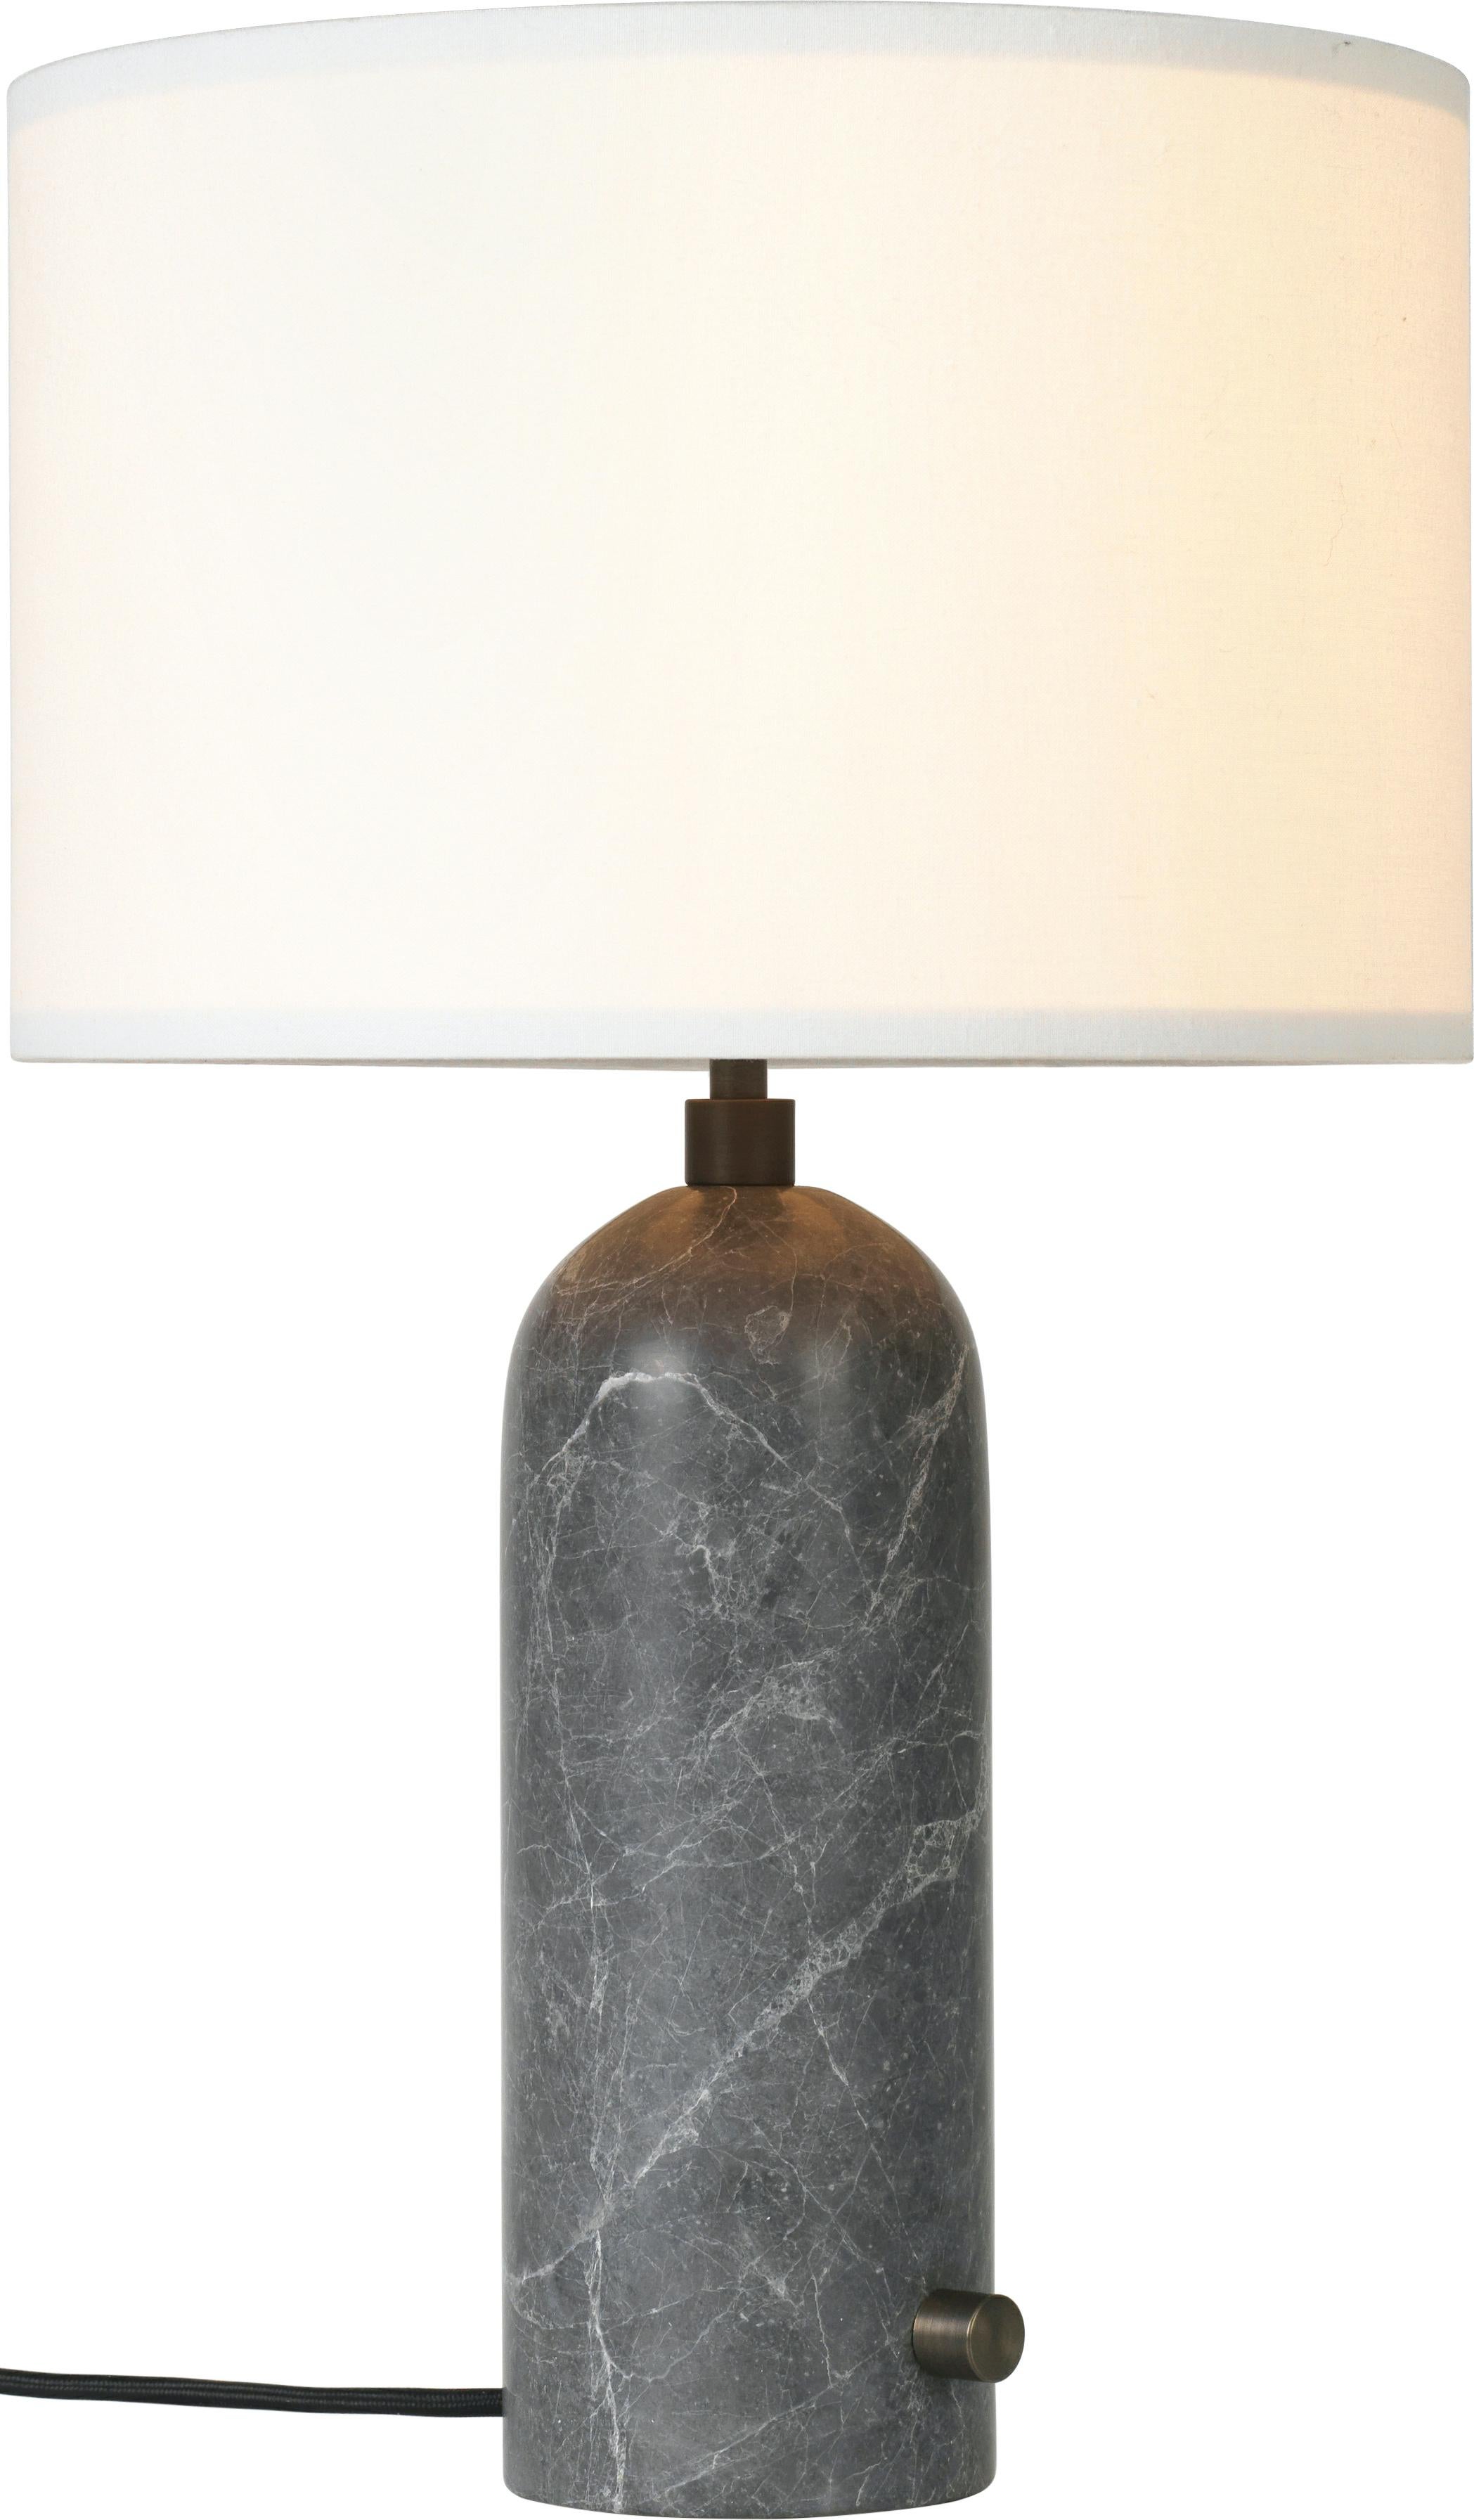 Large 'Gravity' Marble Table Lamp by Space Copenhagen for Gubi in Black For Sale 3